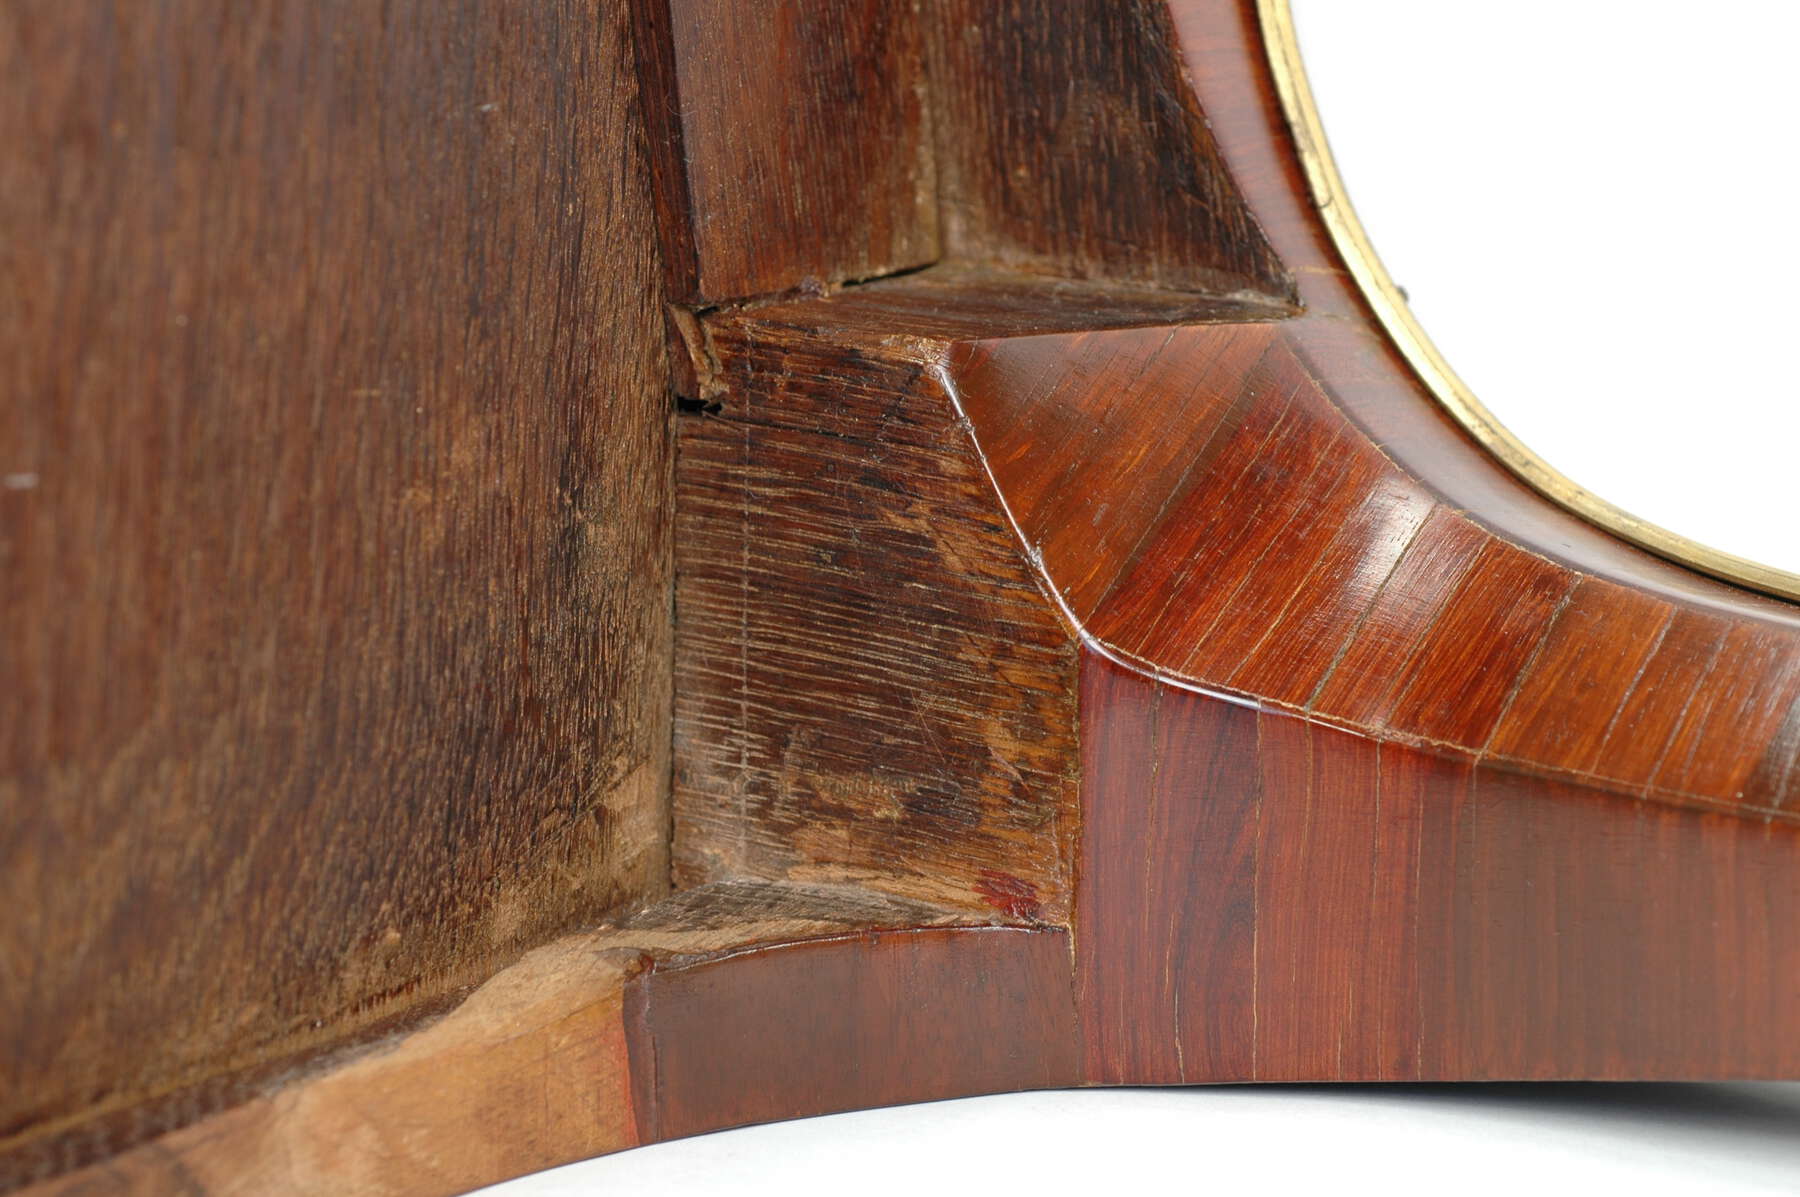 detail of the leg joinery, showing multicolored wooden pieces fitted tightly together